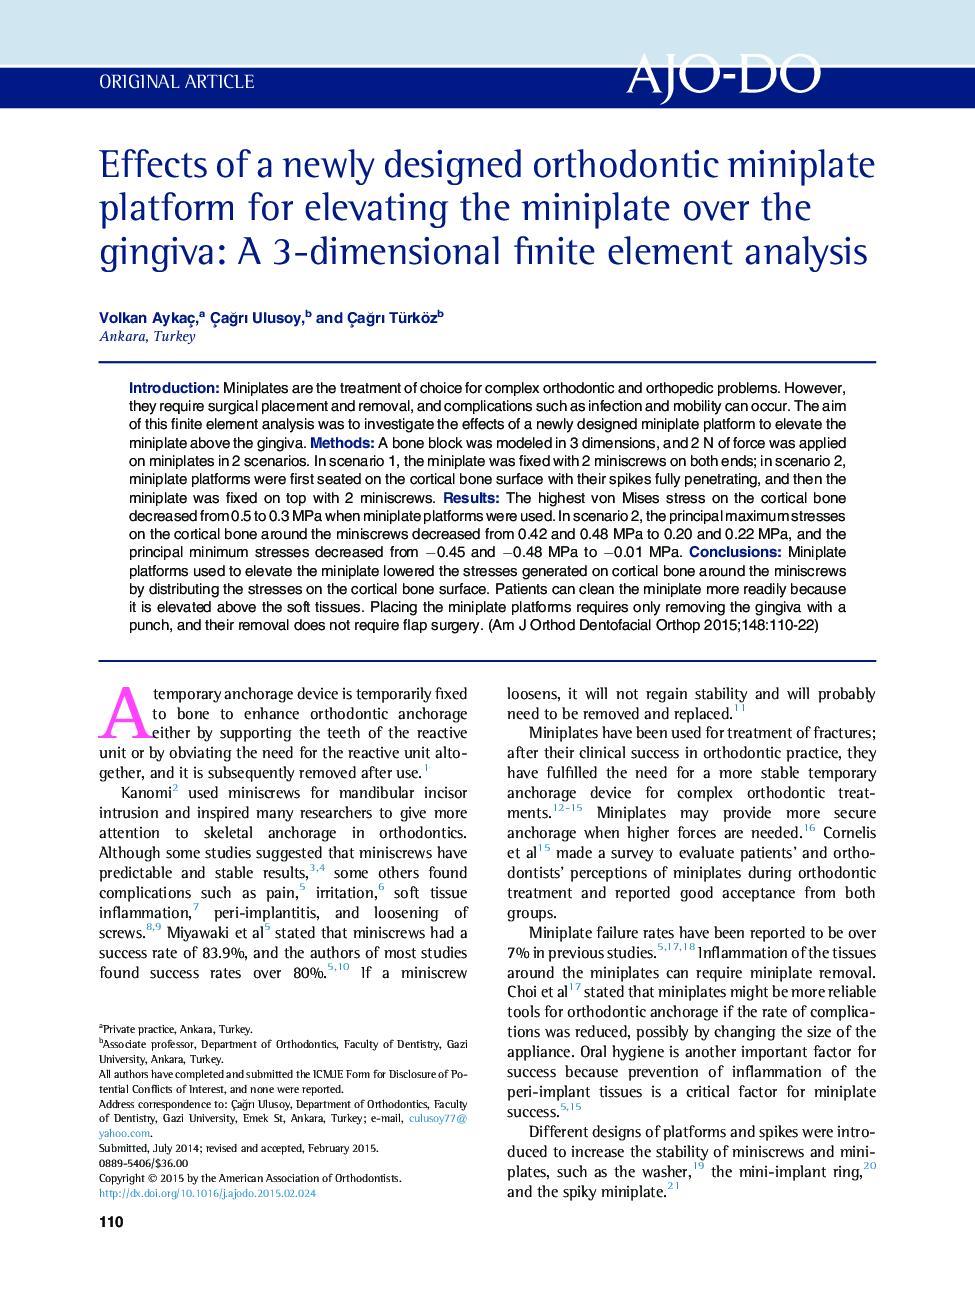 Effects of a newly designed orthodontic miniplate platform for elevating the miniplate over the gingiva: A 3-dimensional finite element analysis 